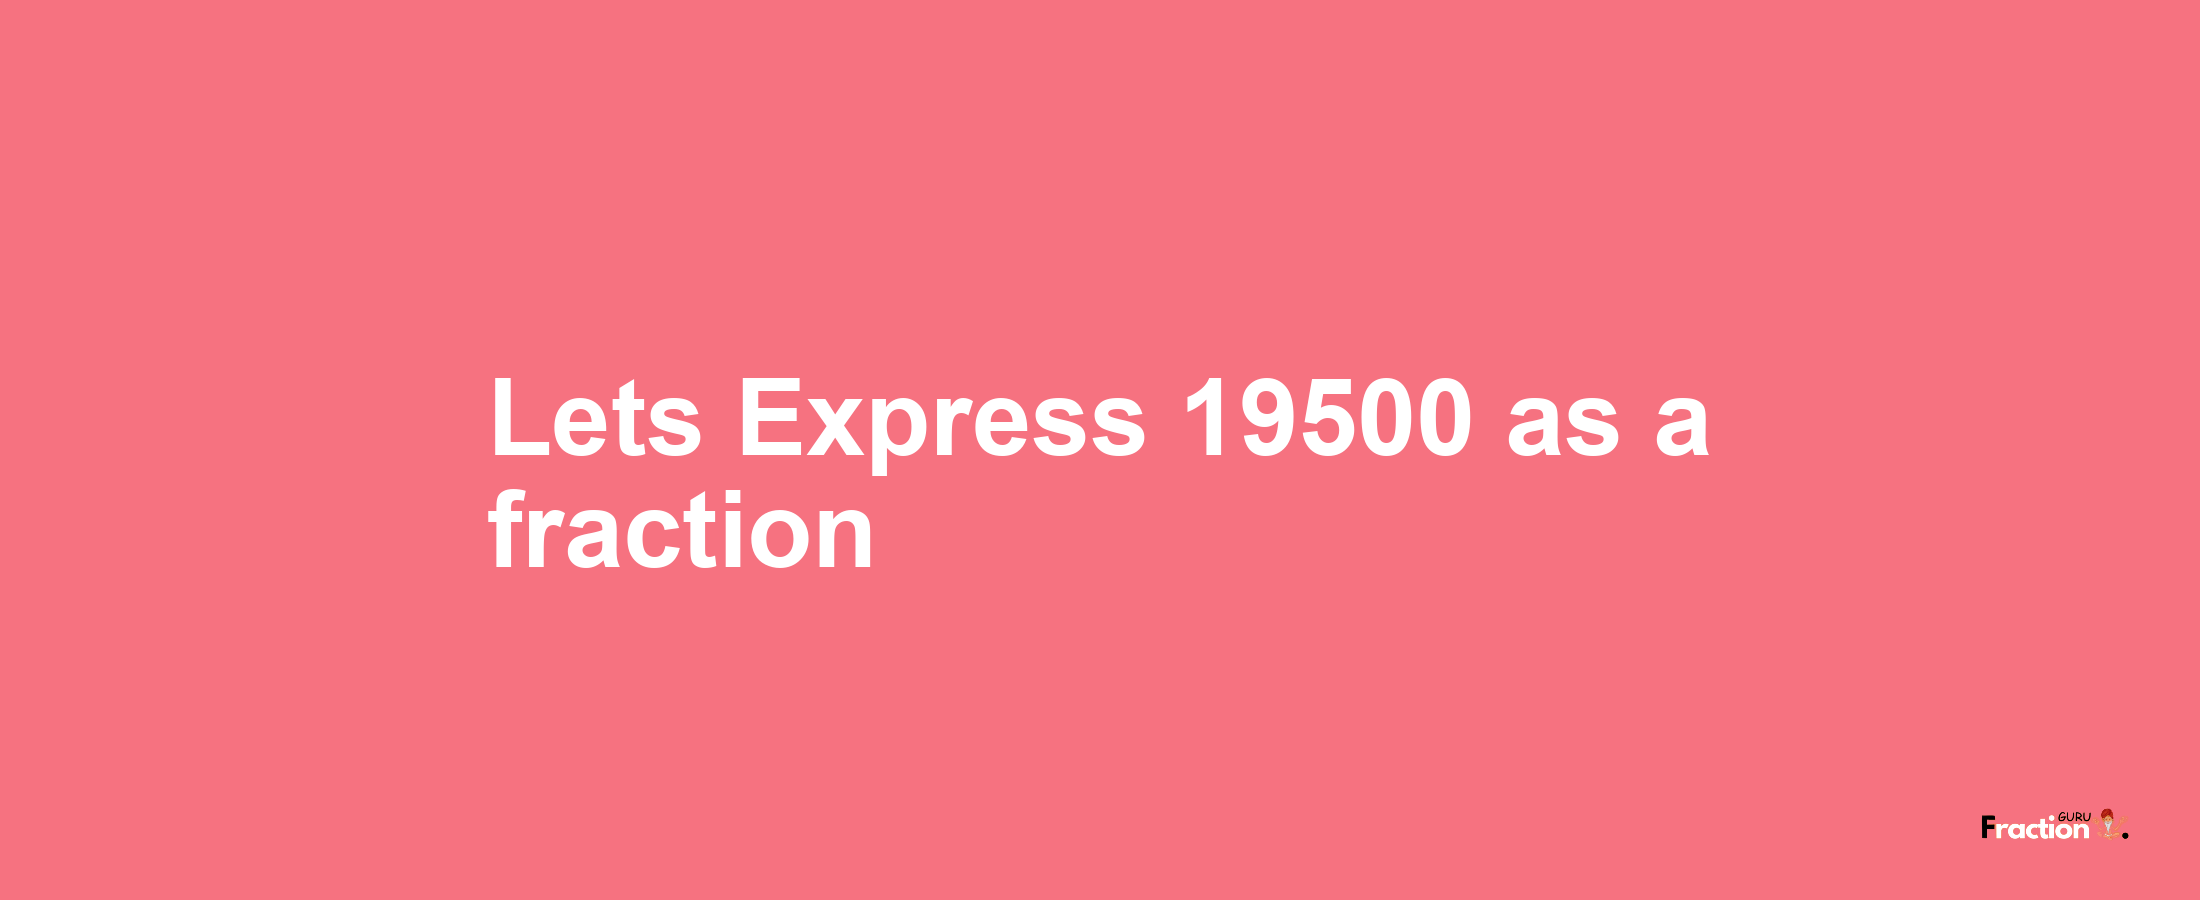 Lets Express 19500 as afraction